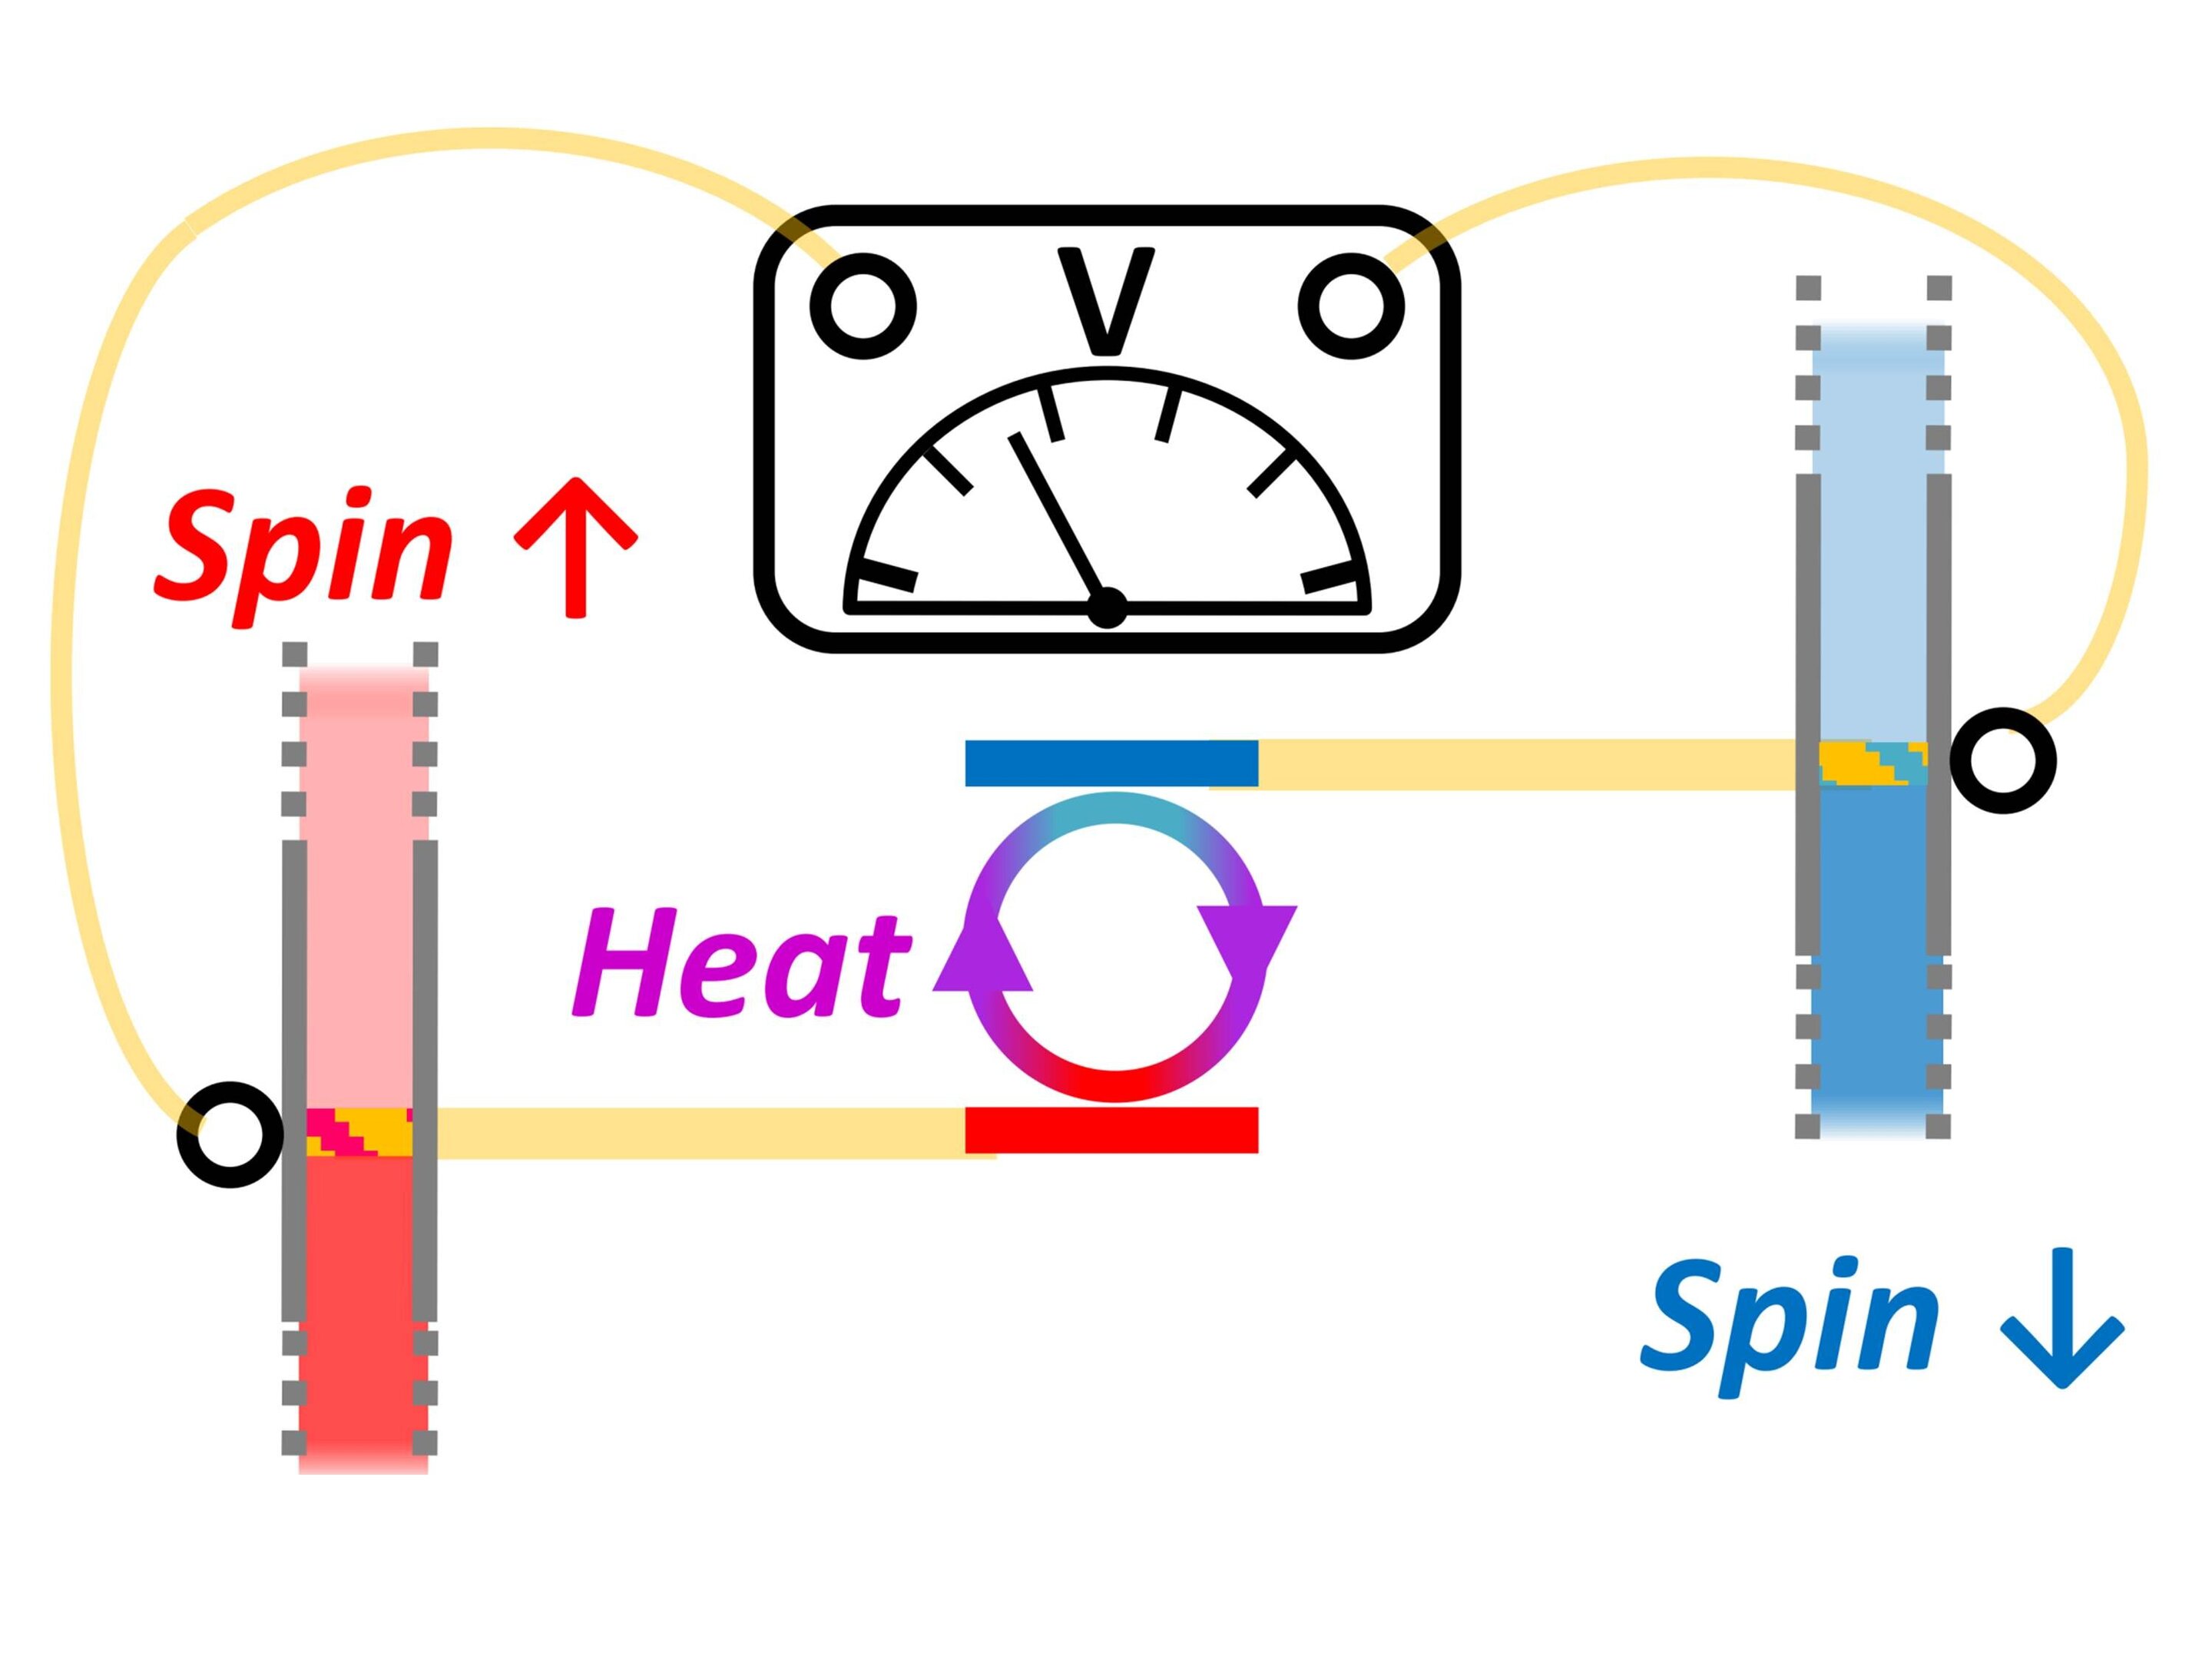 Combining spintronics and quantum thermodynamics to harvest energy at room temperature